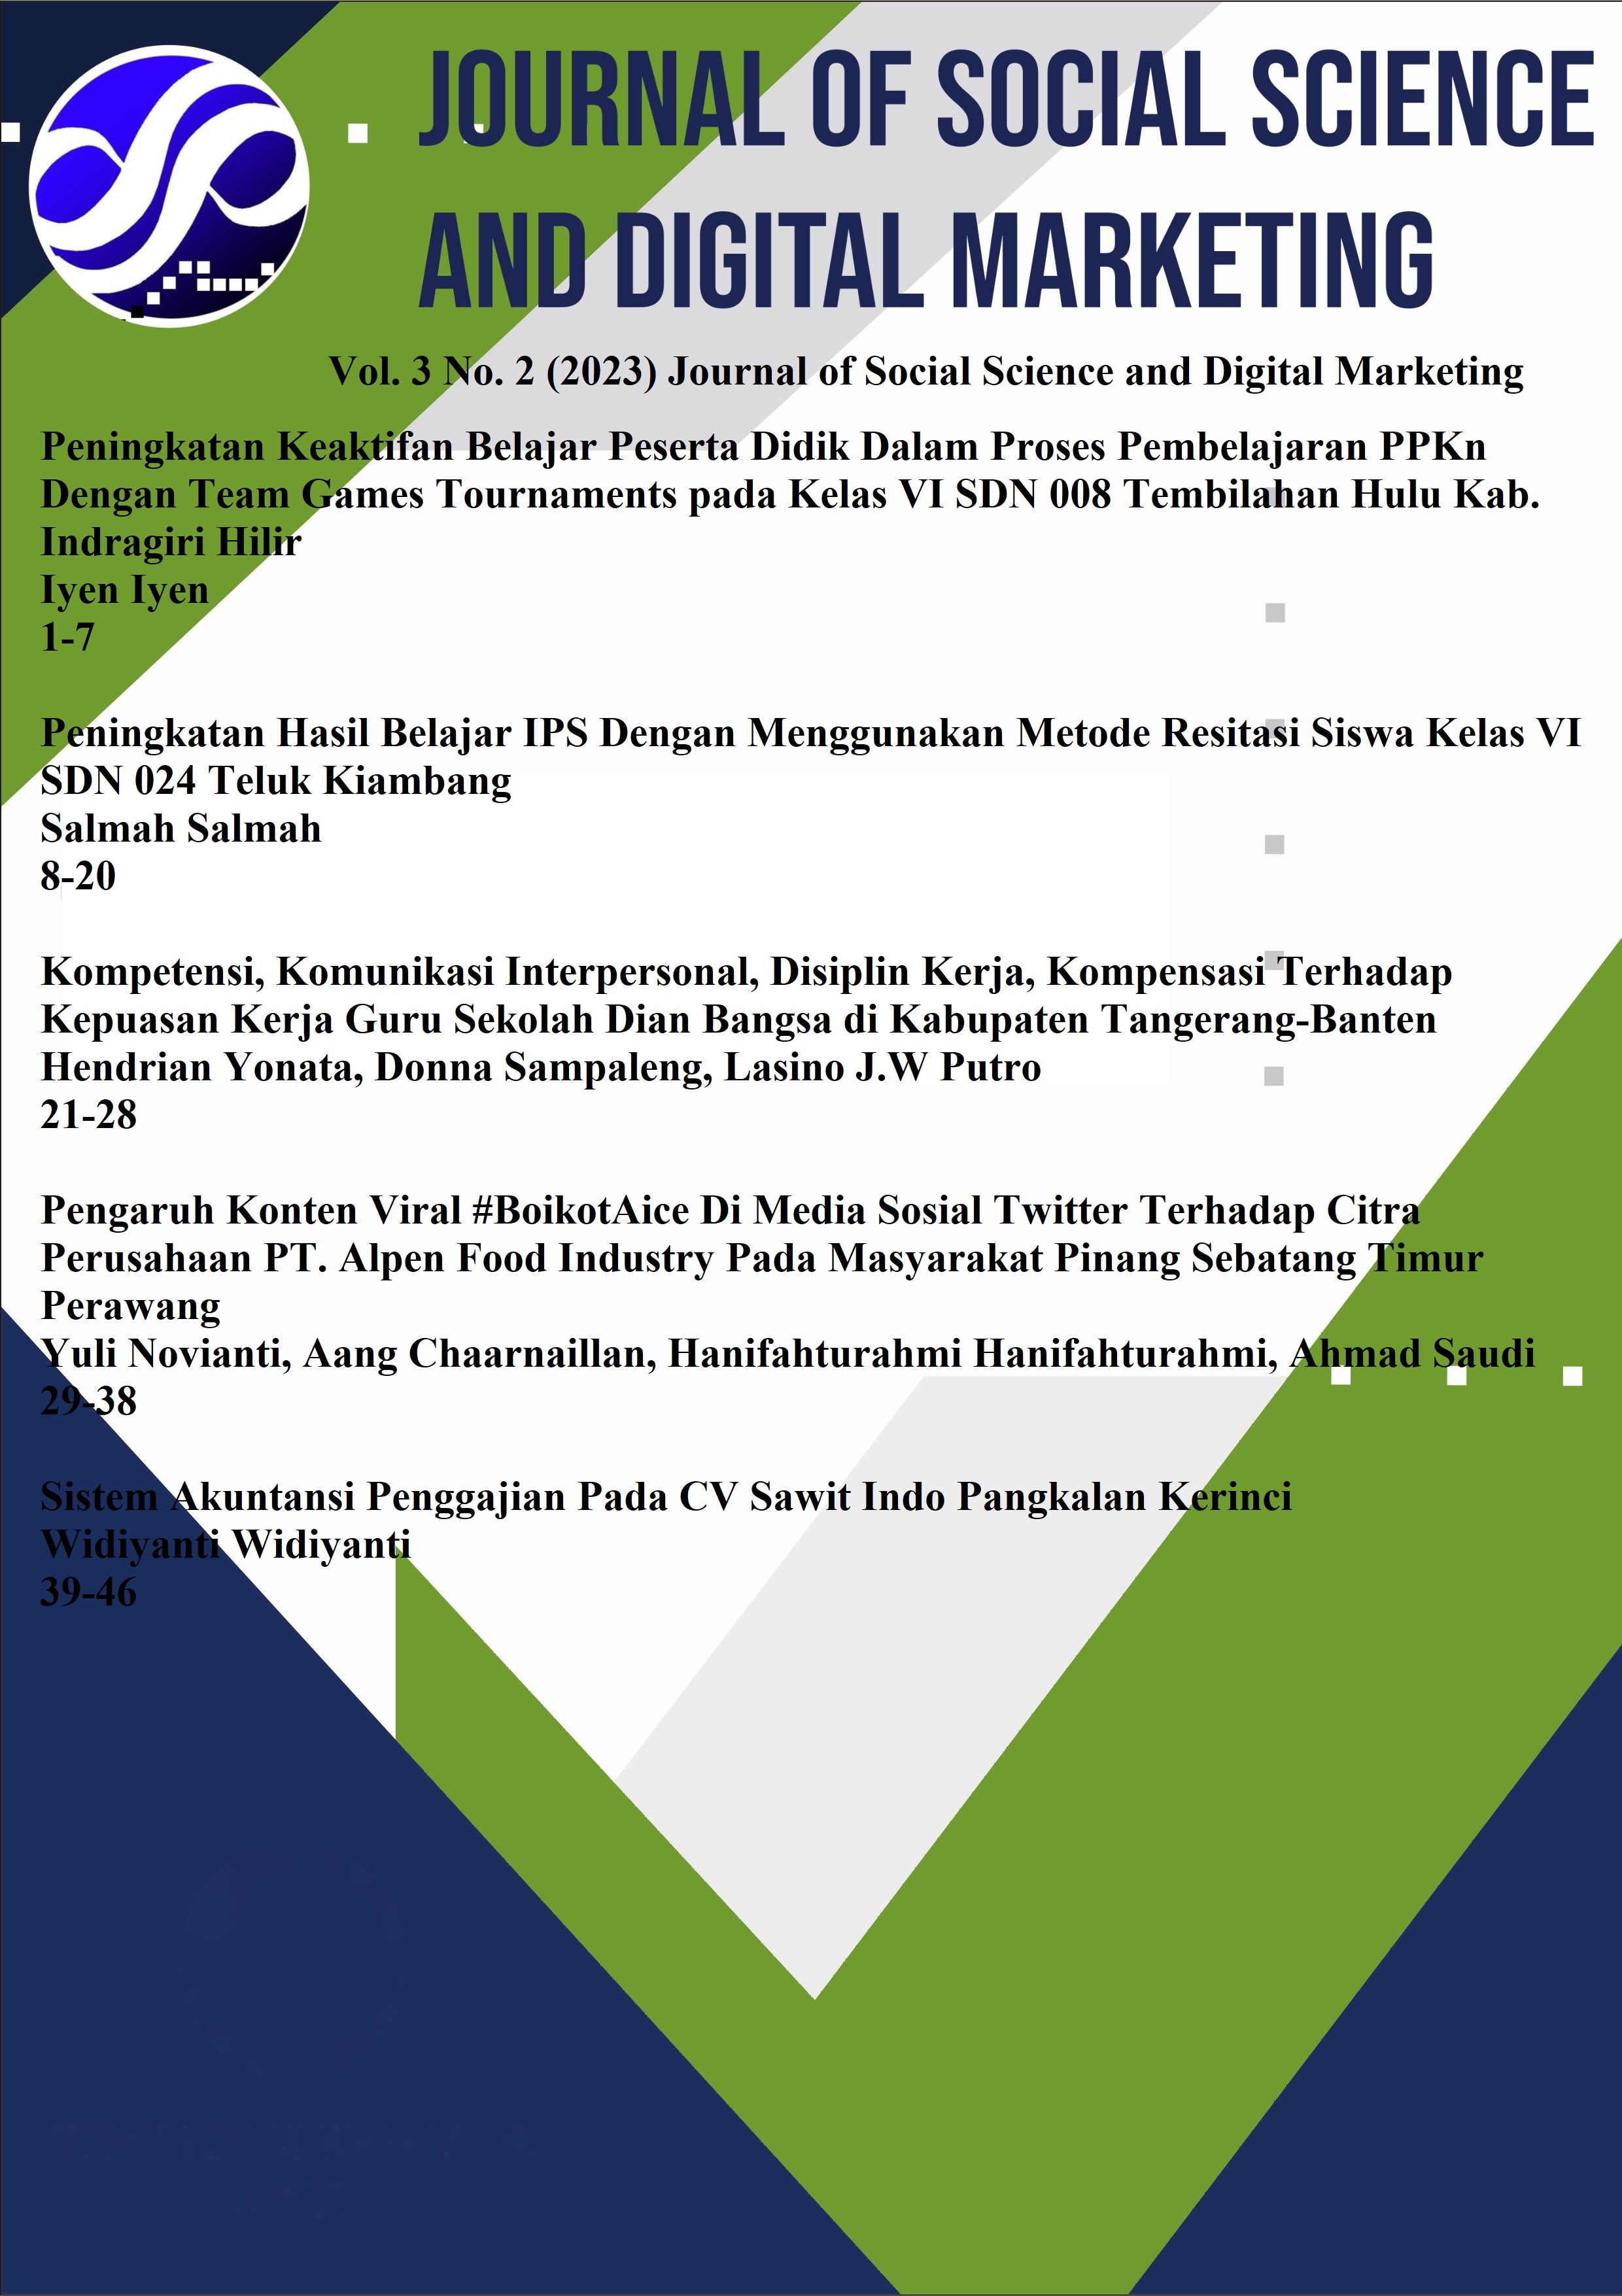 					View Vol. 3 No. 2 (2023): Journal of Social Science and Digital Marketing
				